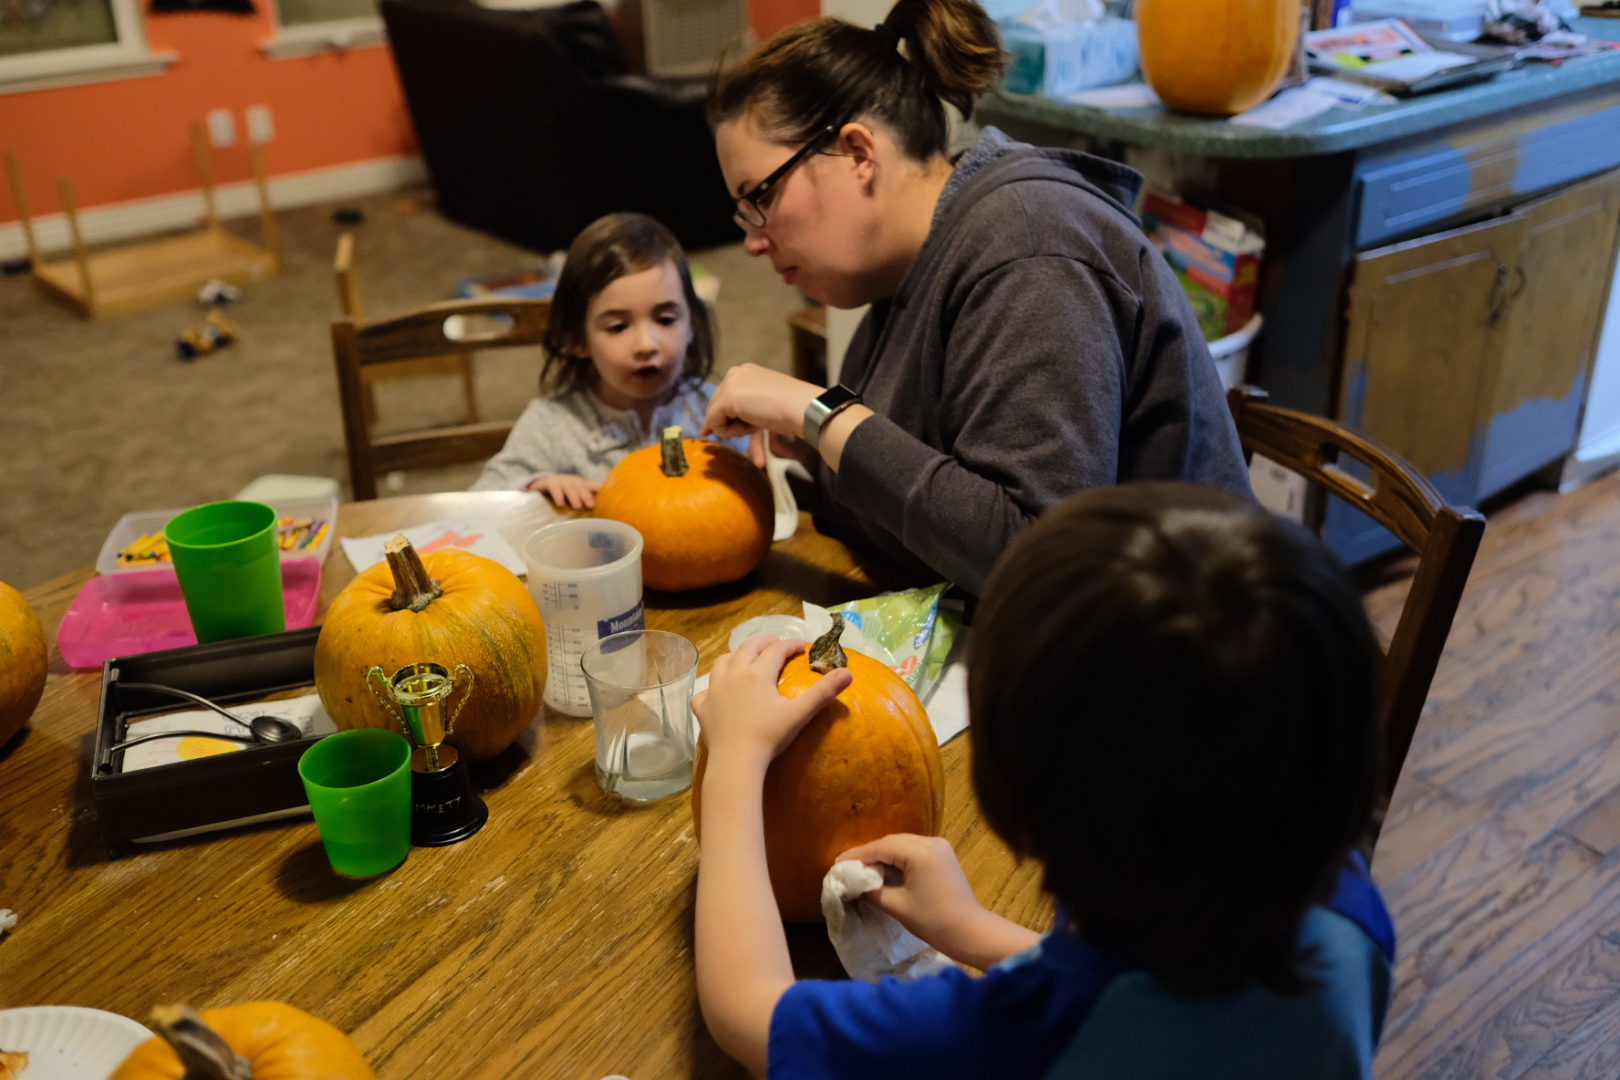 Alicia, Emmett, and Elle are carving pumpkins